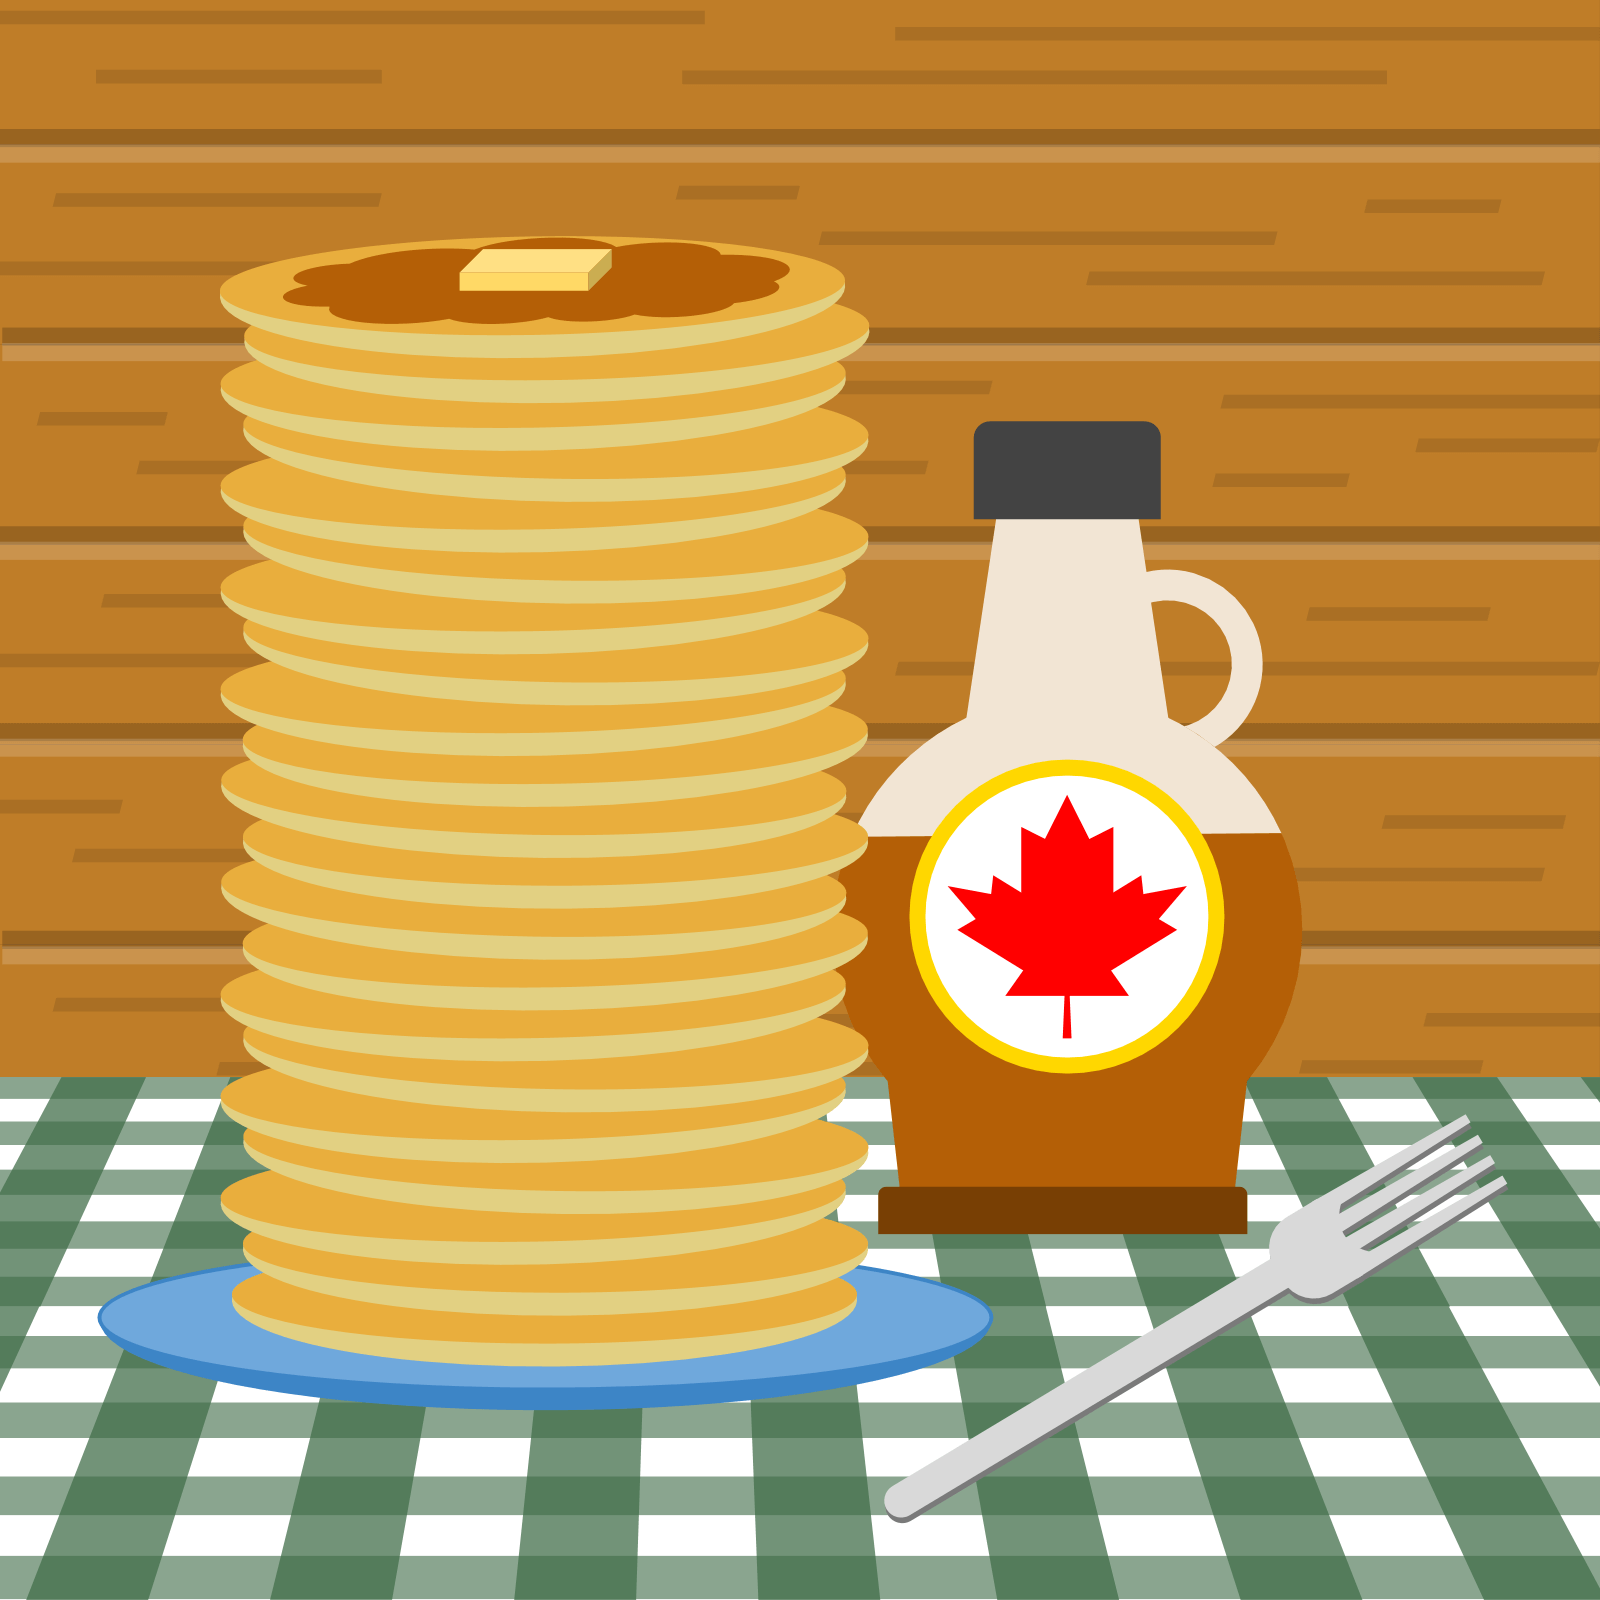 Stack of pancakes, bottle of syrup, and a fork